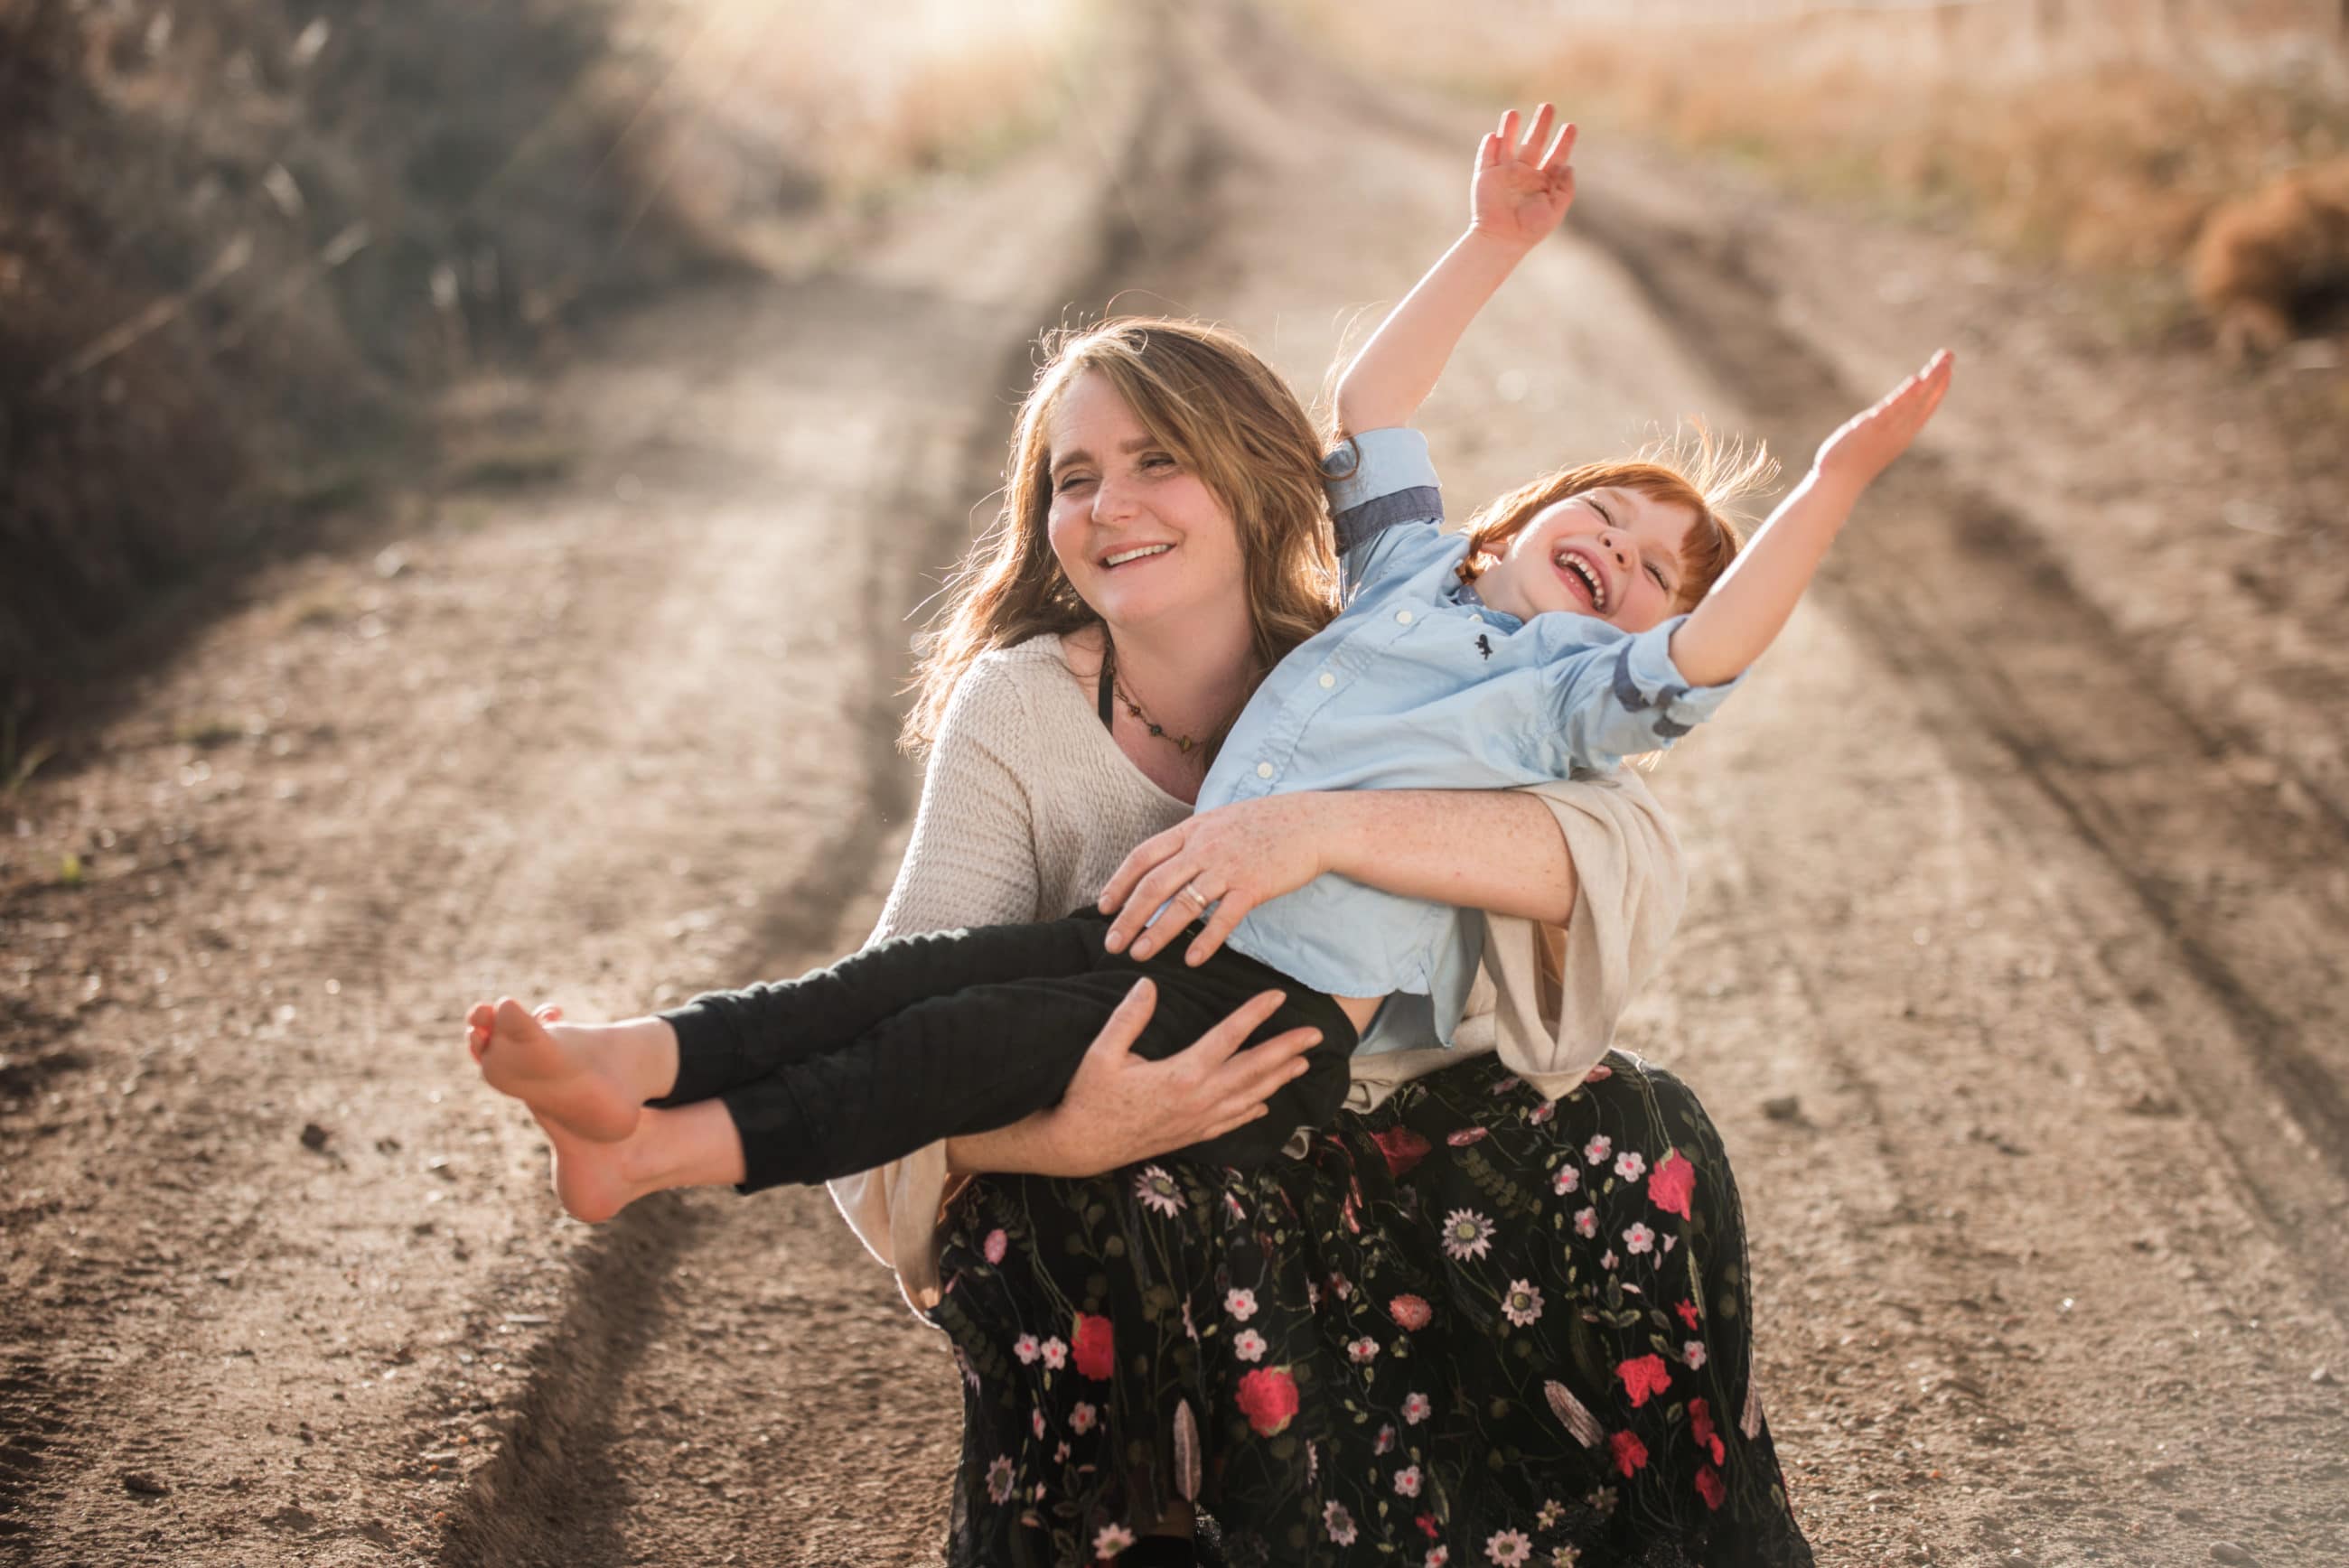 mom and son on dirt road smiling with joy hands in the air - child photography boulder